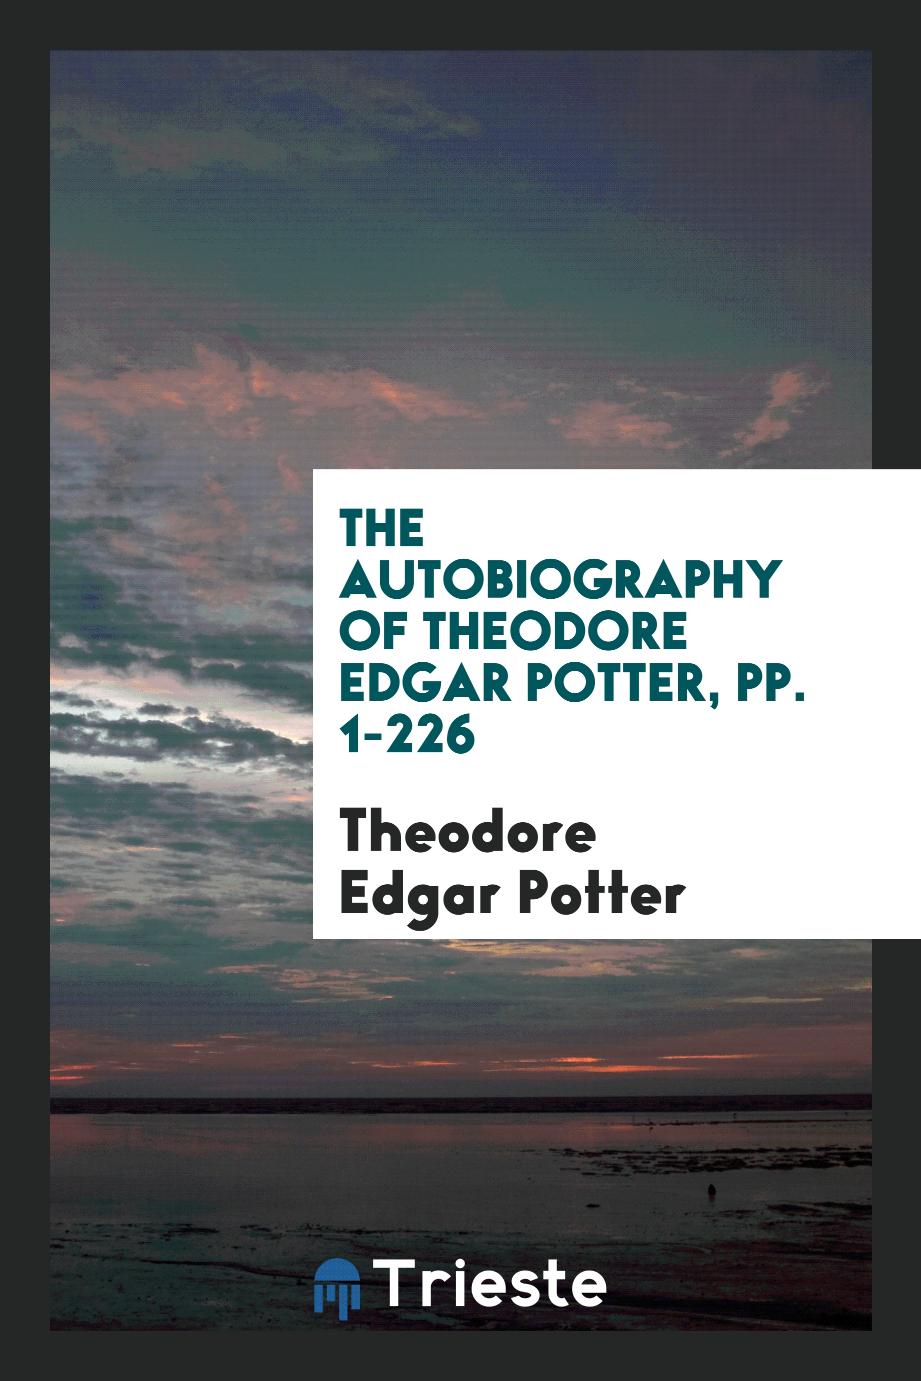 The Autobiography of Theodore Edgar Potter, pp. 1-226